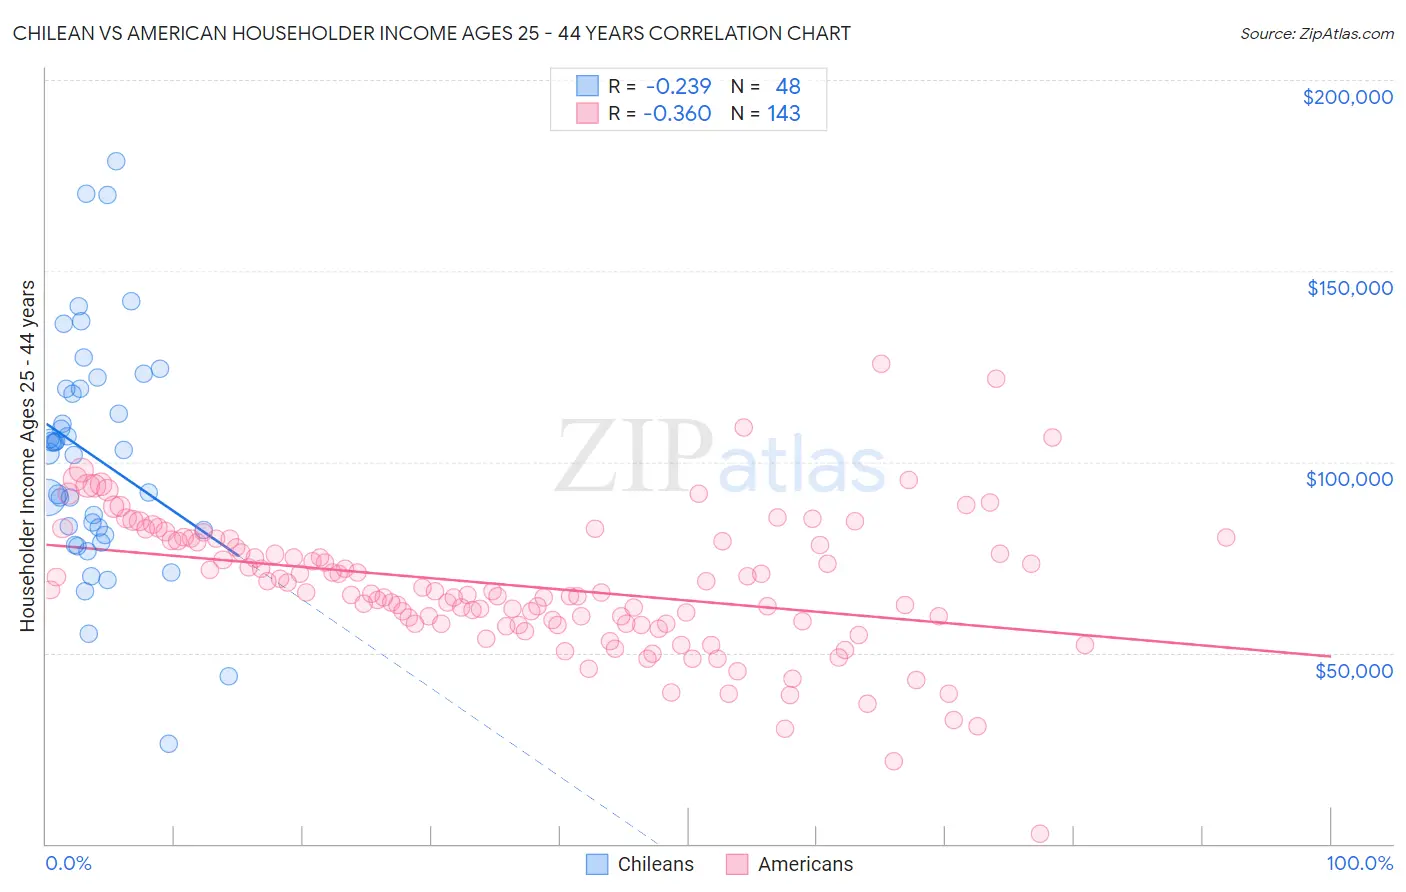 Chilean vs American Householder Income Ages 25 - 44 years